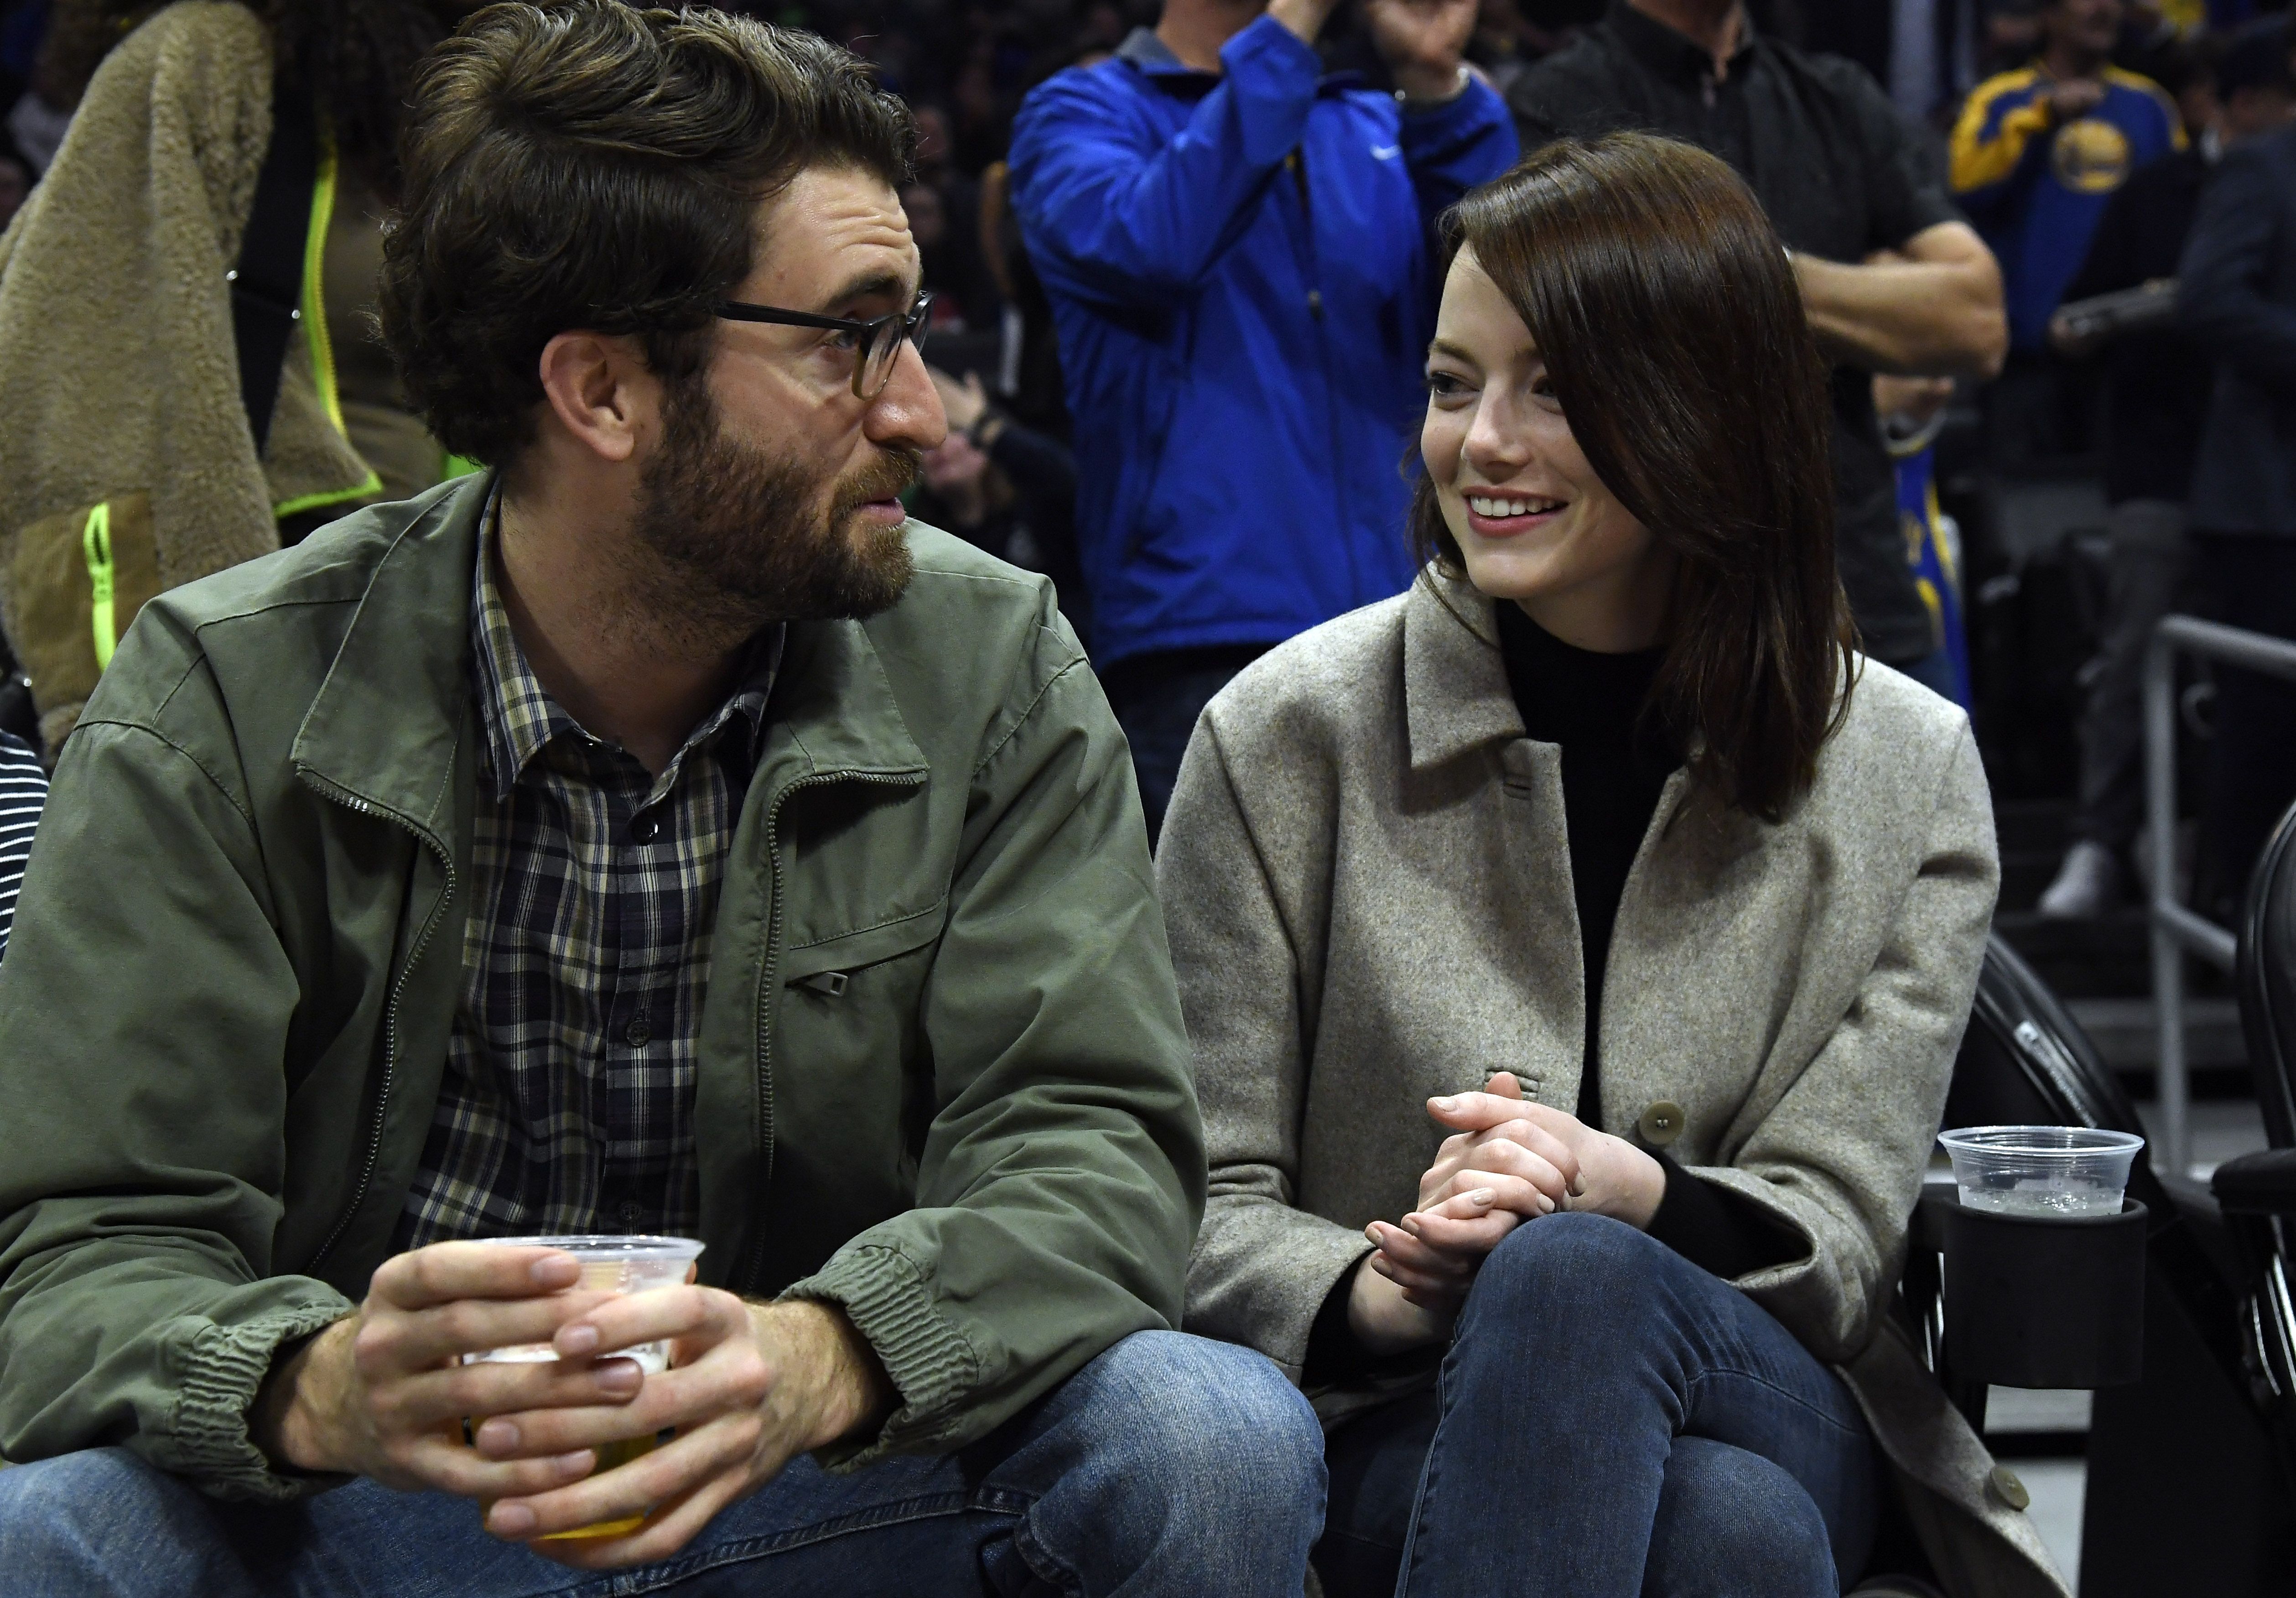 best of emma stone on X: Emma Stone and her husband Dave McCary